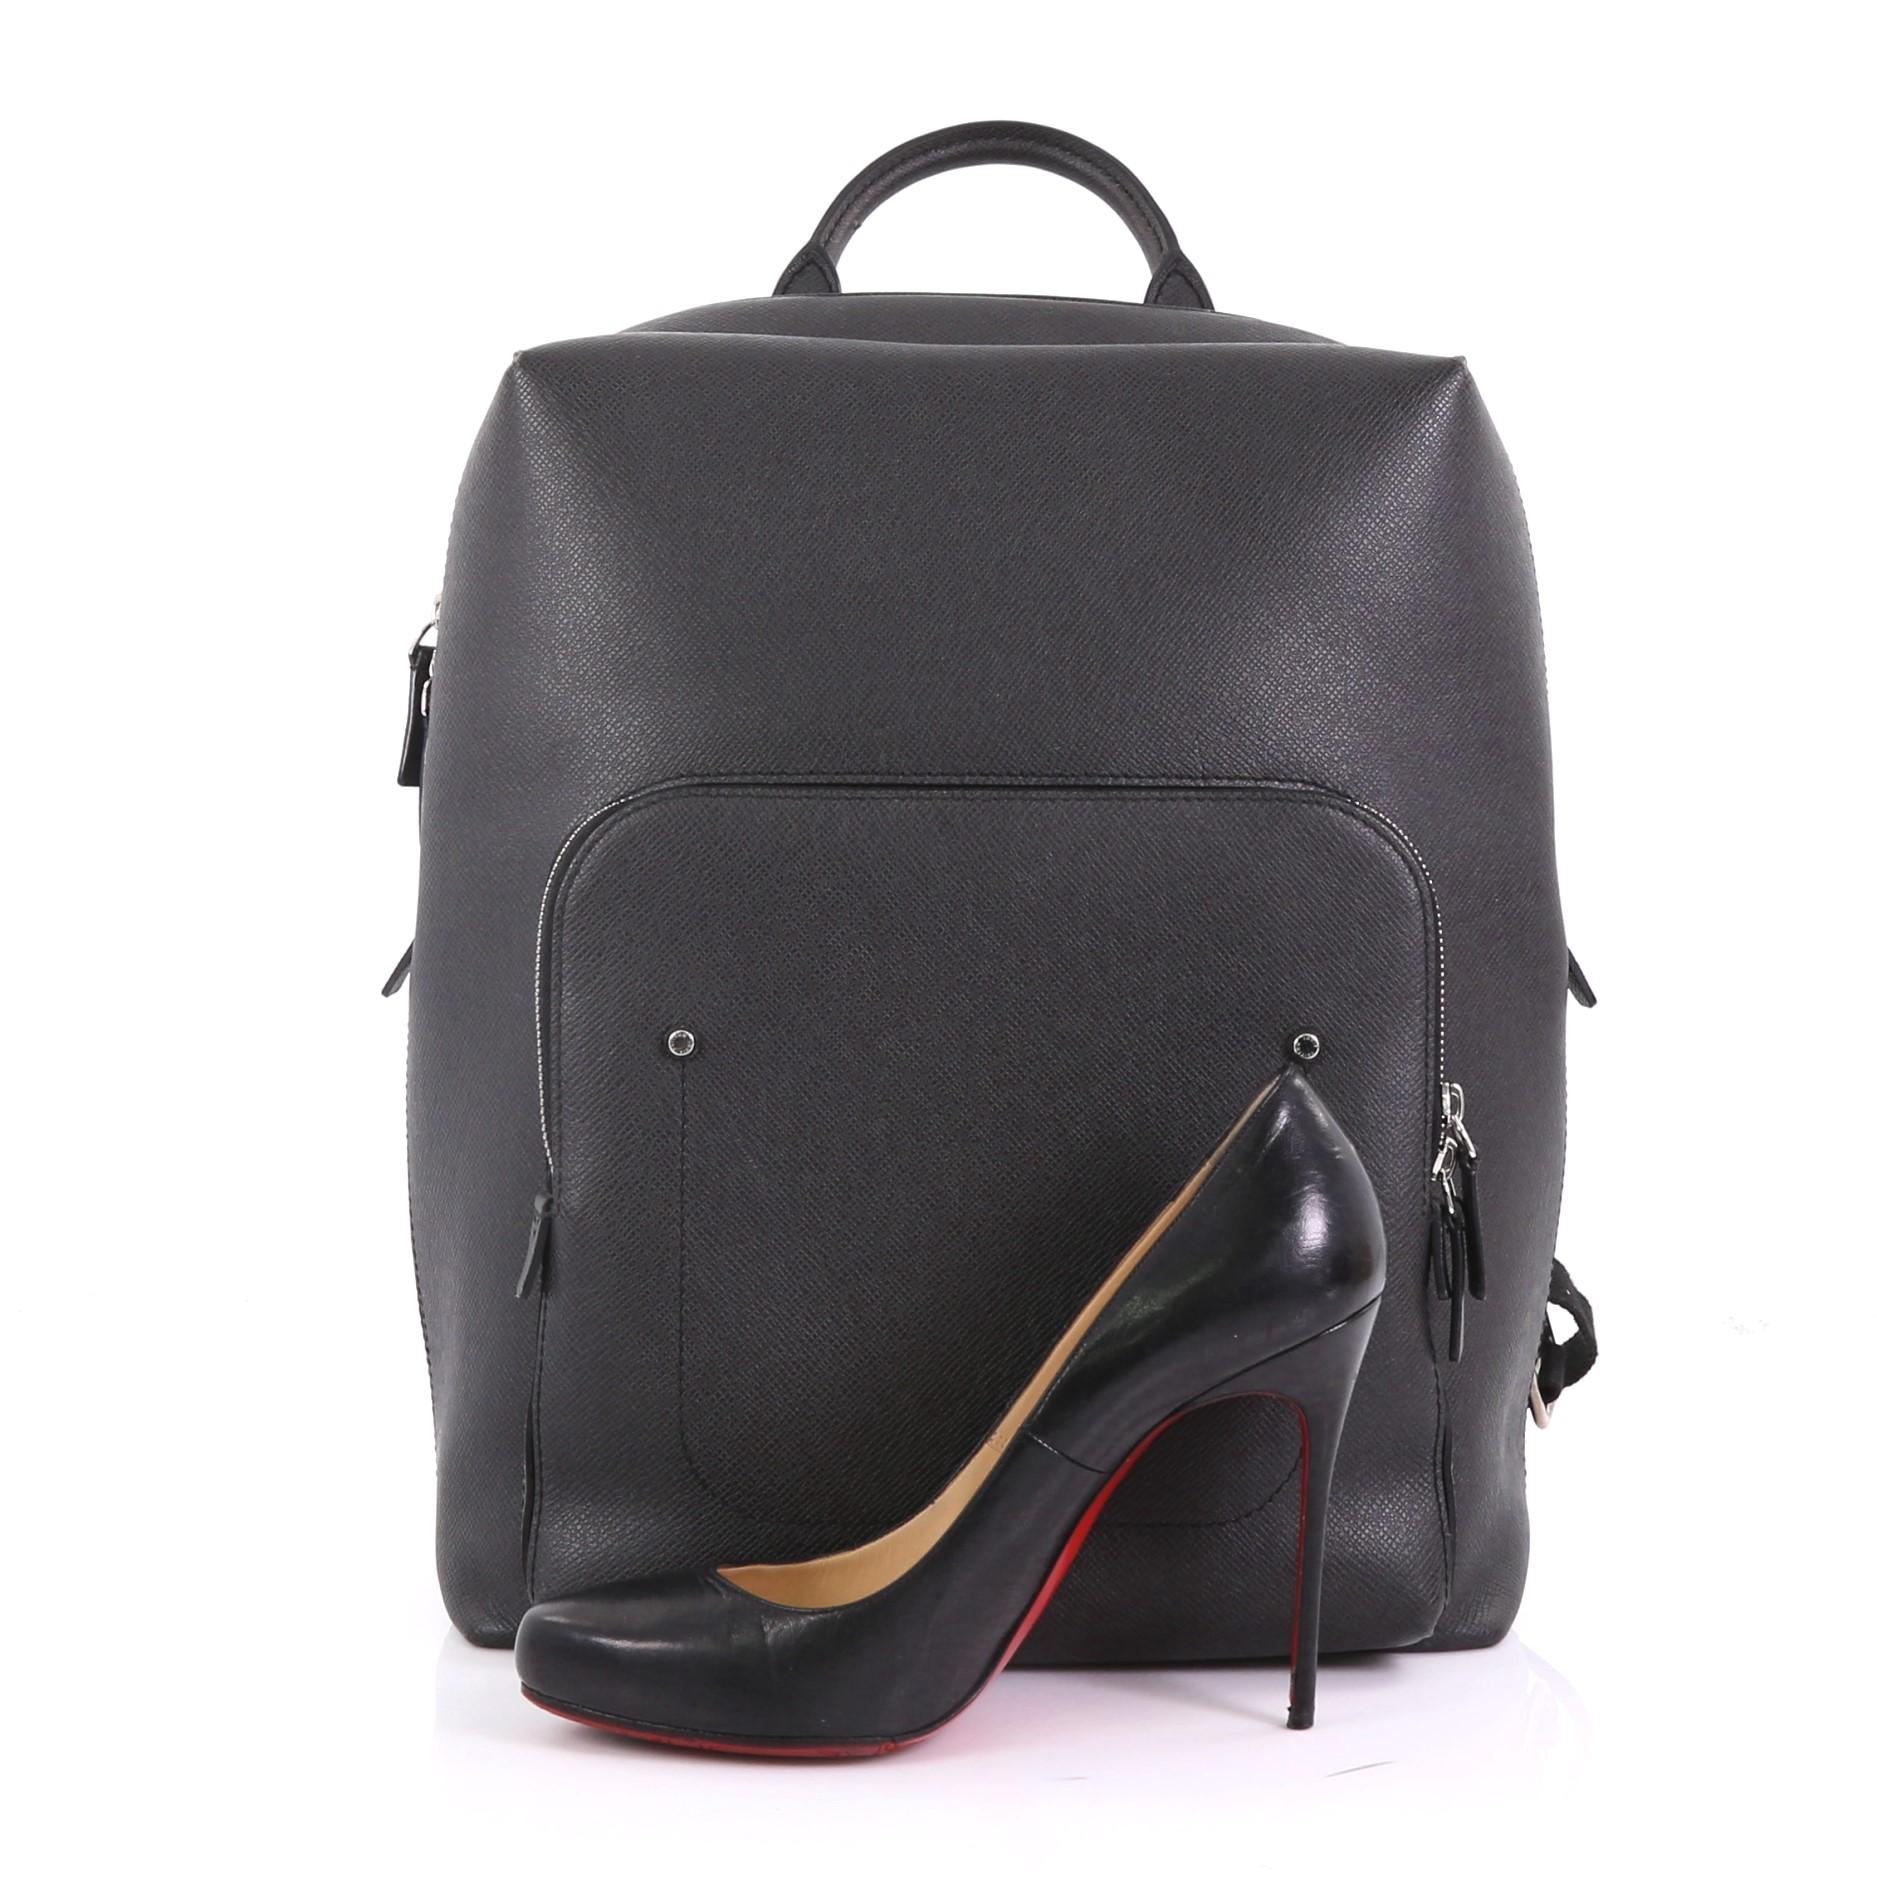 This Louis Vuitton Grigori Backpack Taiga Leather, crafted from black taiga leather, features rolled top handle, adjustable backpack straps, front zip pocket, and silver-tone hardware. Its top zip closure opens to a black fabric interior with zip